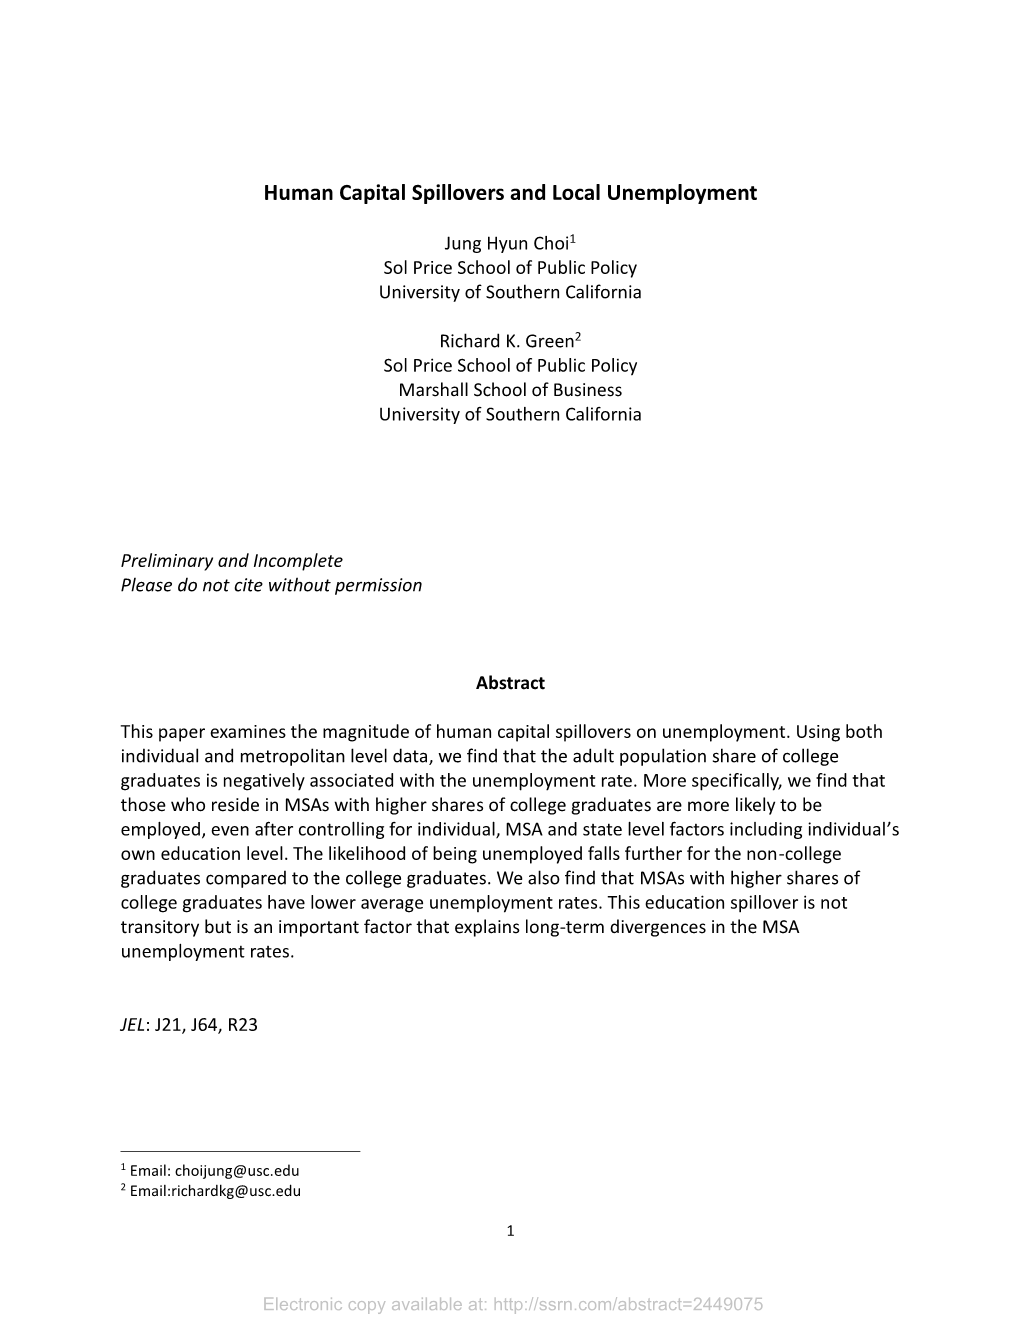 Human Capital Spillovers and Local Unemployment